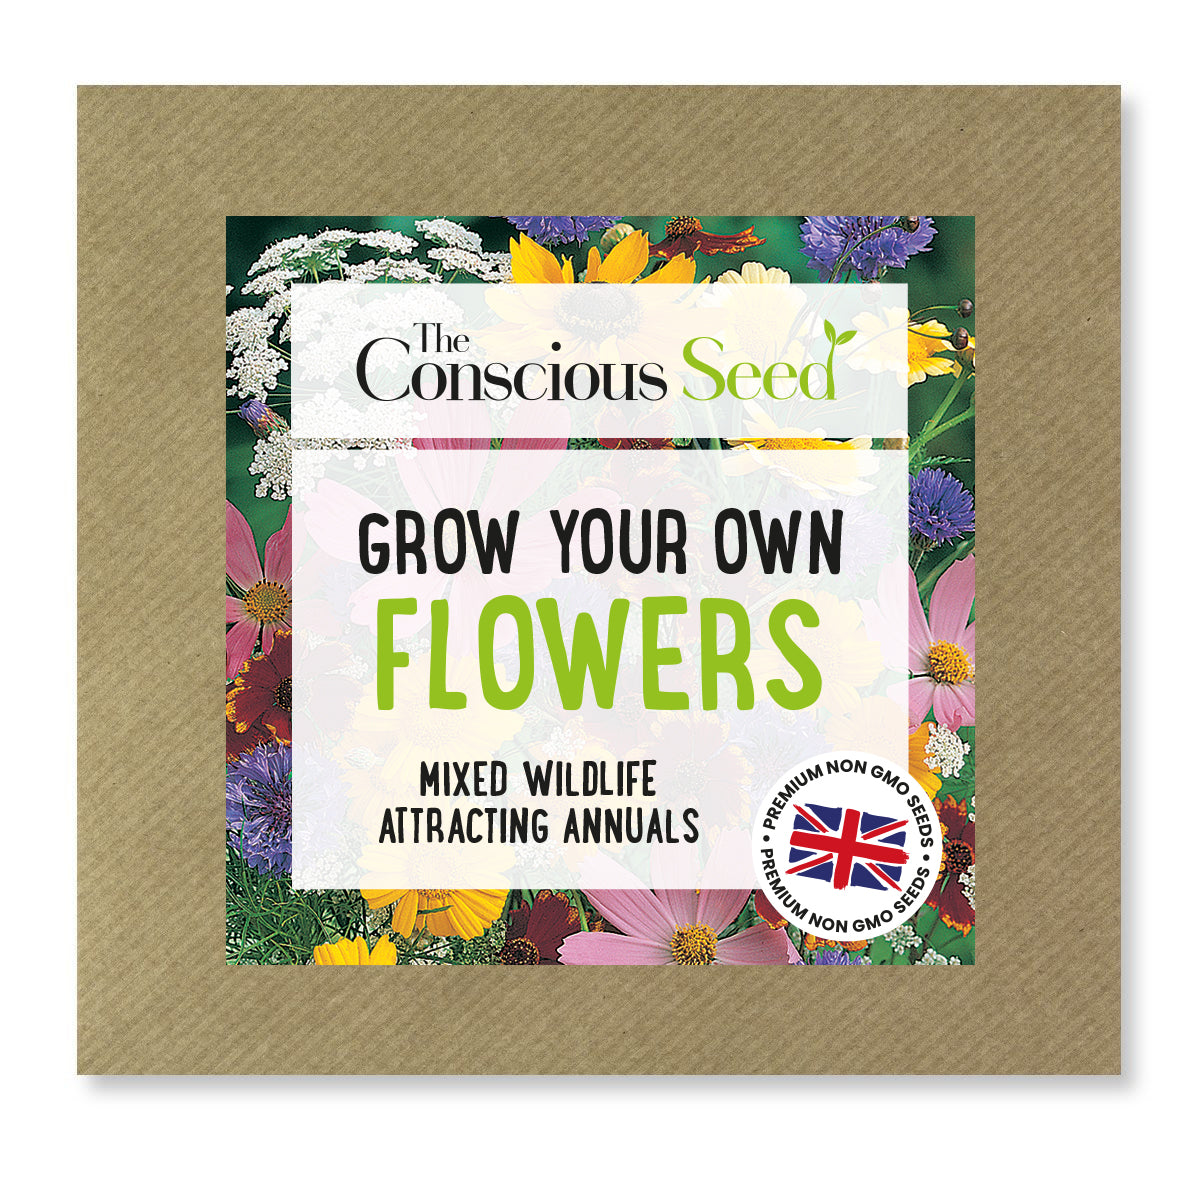 Grow Your Own Flowers